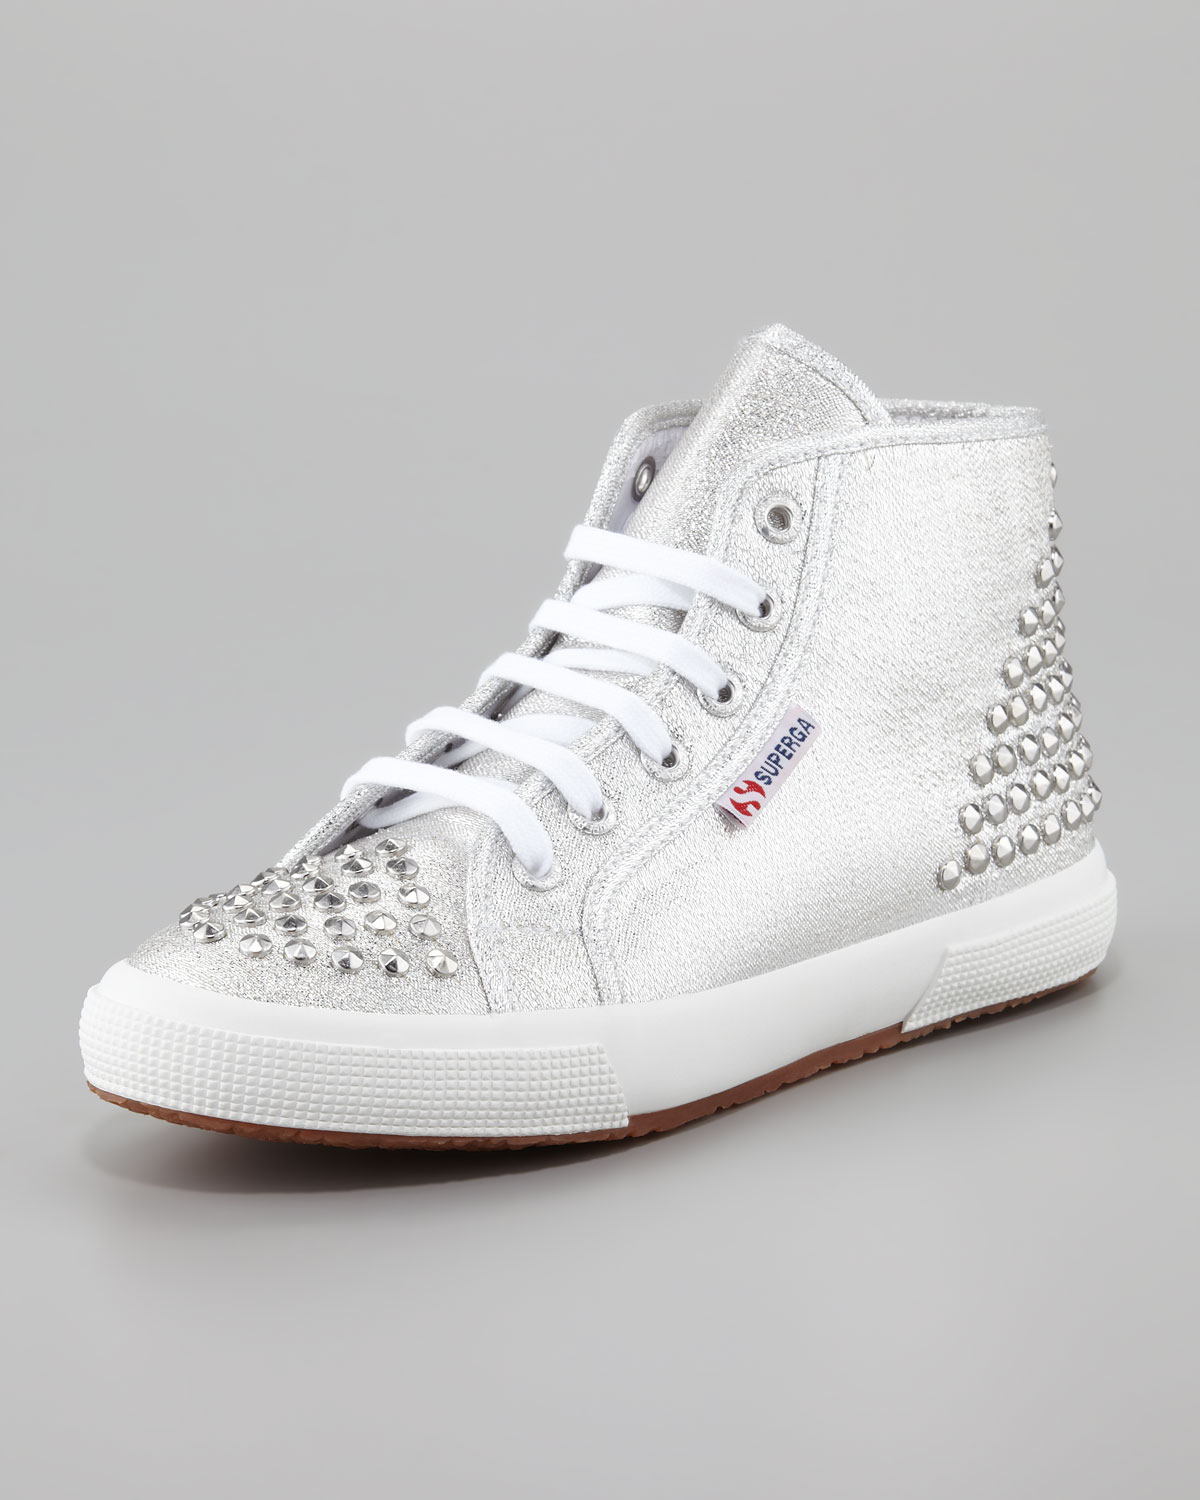 Download Superga Studded Metallic Canvas Hitop Sneaker Silver - Lyst